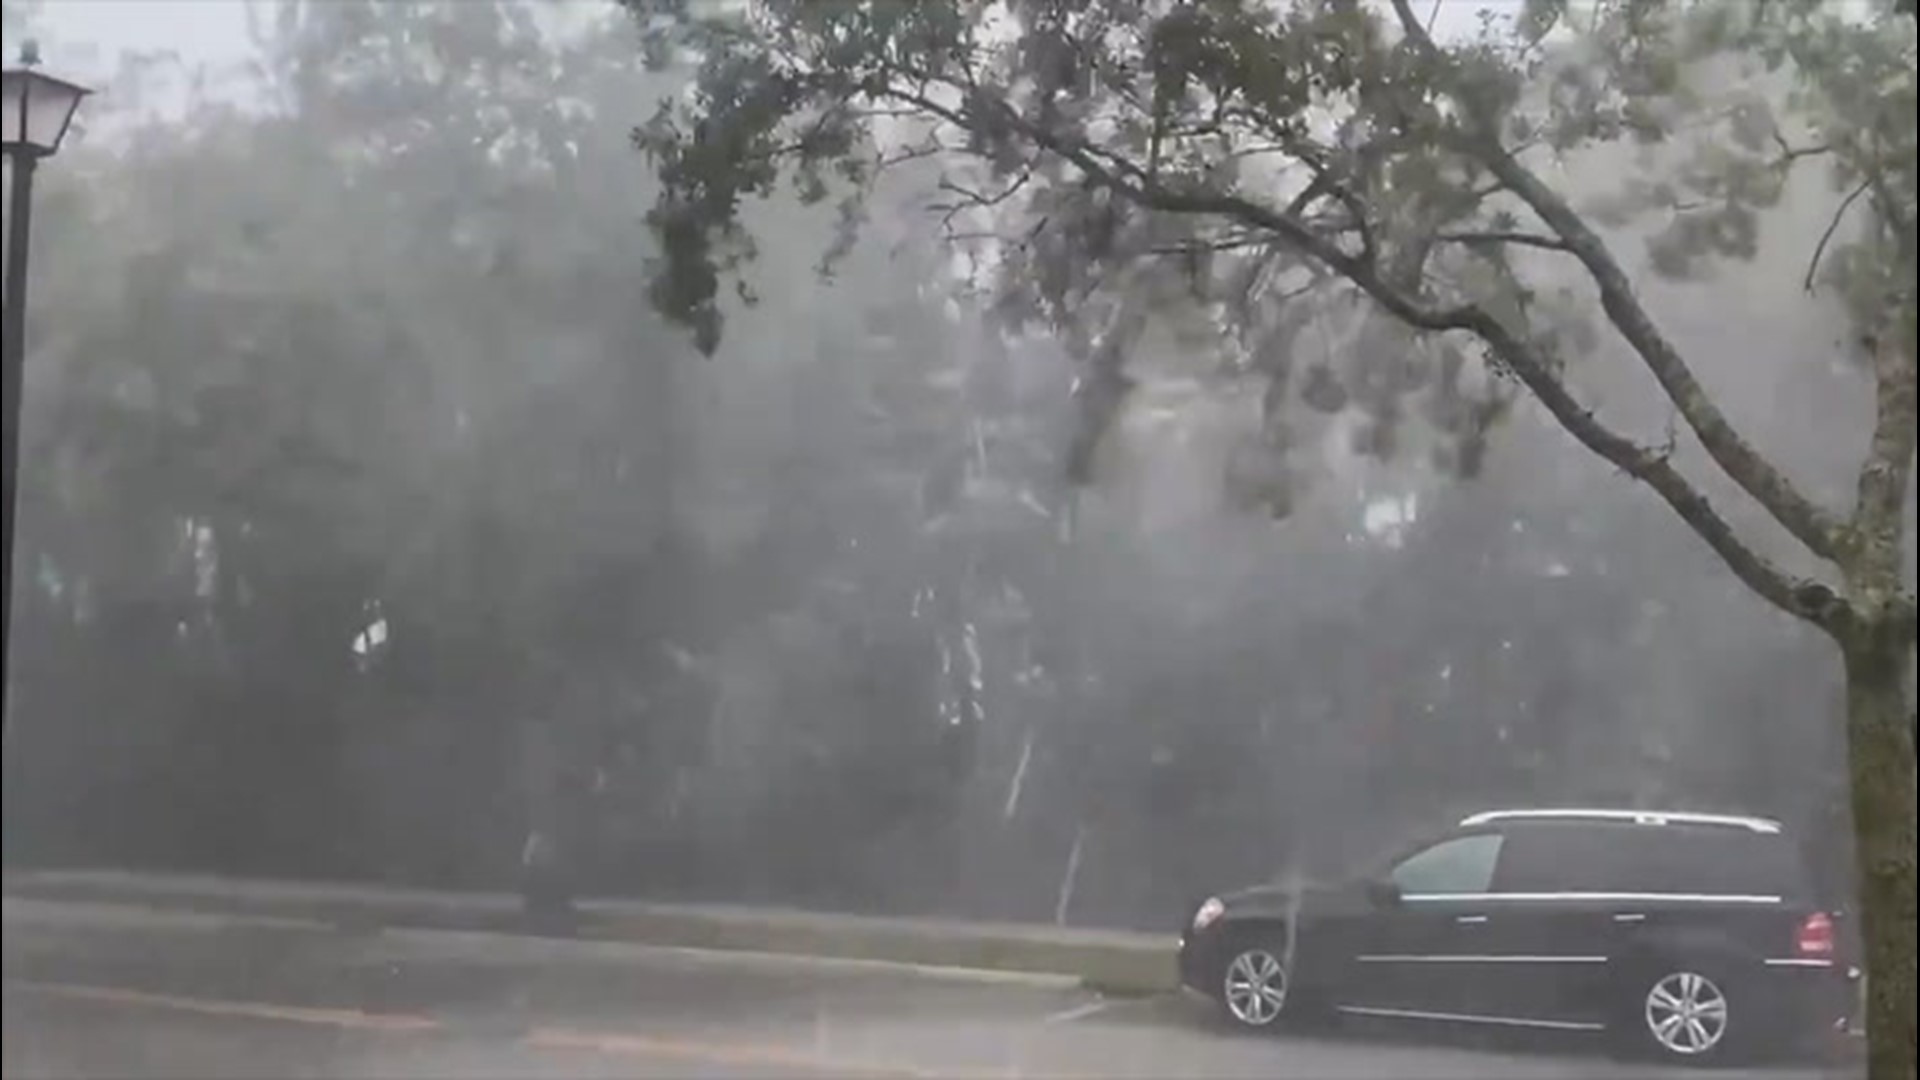 Central Florida was hit by torrential rain, intense wind gusts and showers of hail on April 11, prompting many residents to say it was the worst April storm they've seen in years.